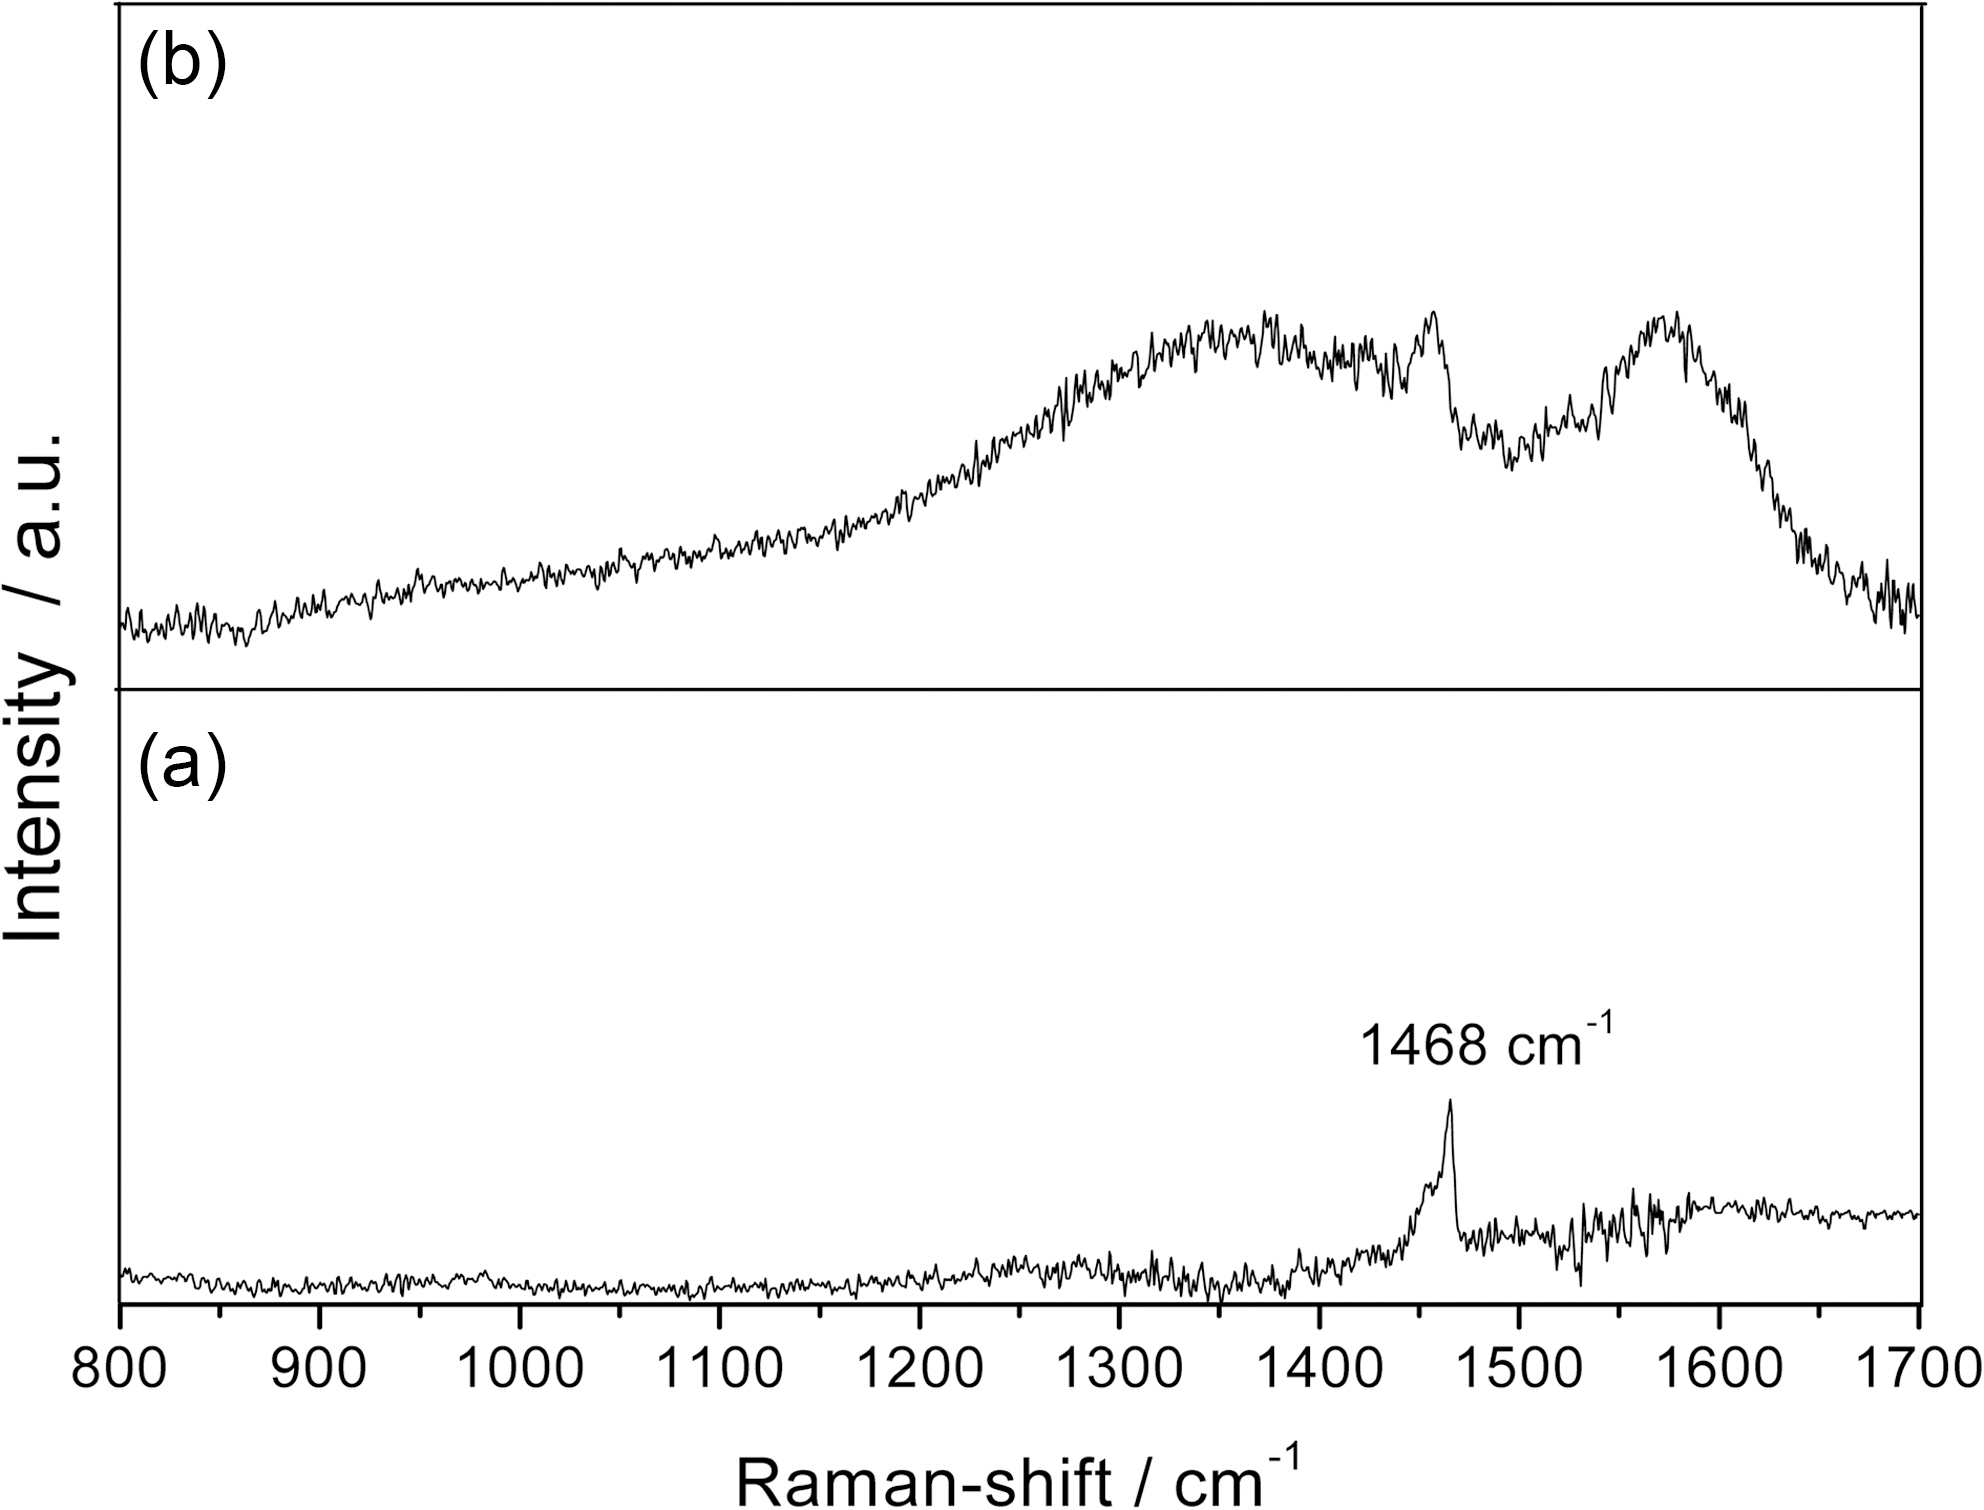 Raman spectra of the as deposited (a) pristine C60 and (b) B:C60 thin film.